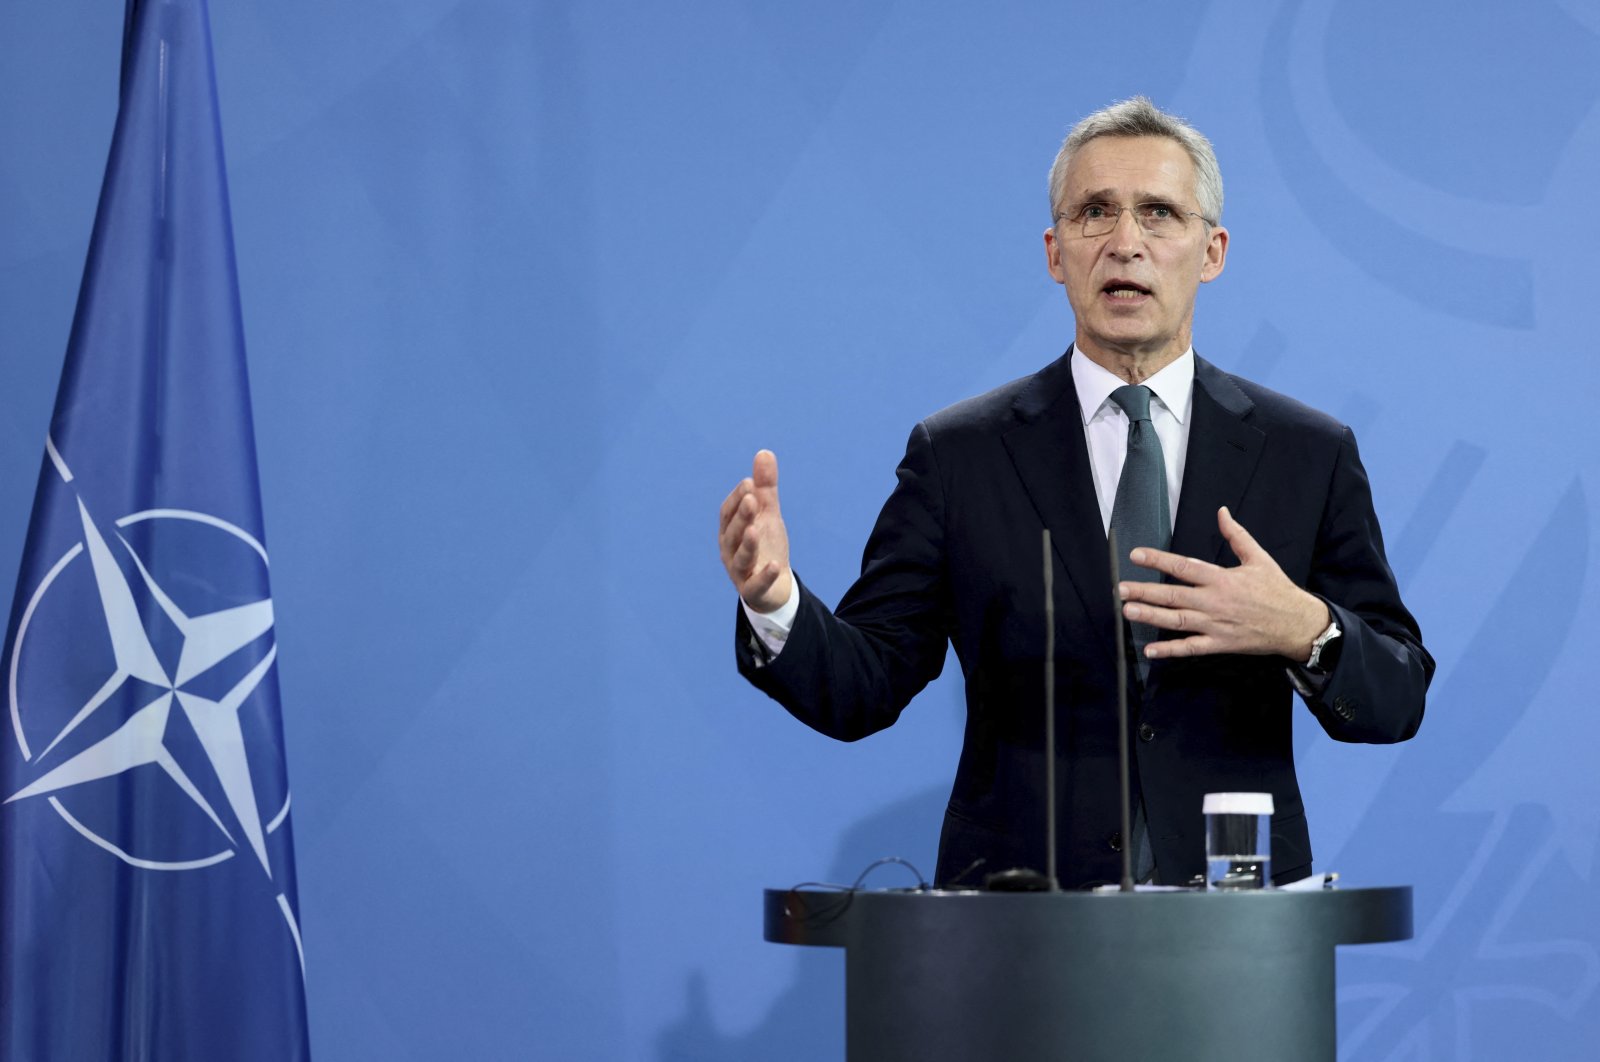 NATO Proposes Several Meetings with Russia Amid Ukraine Tensions